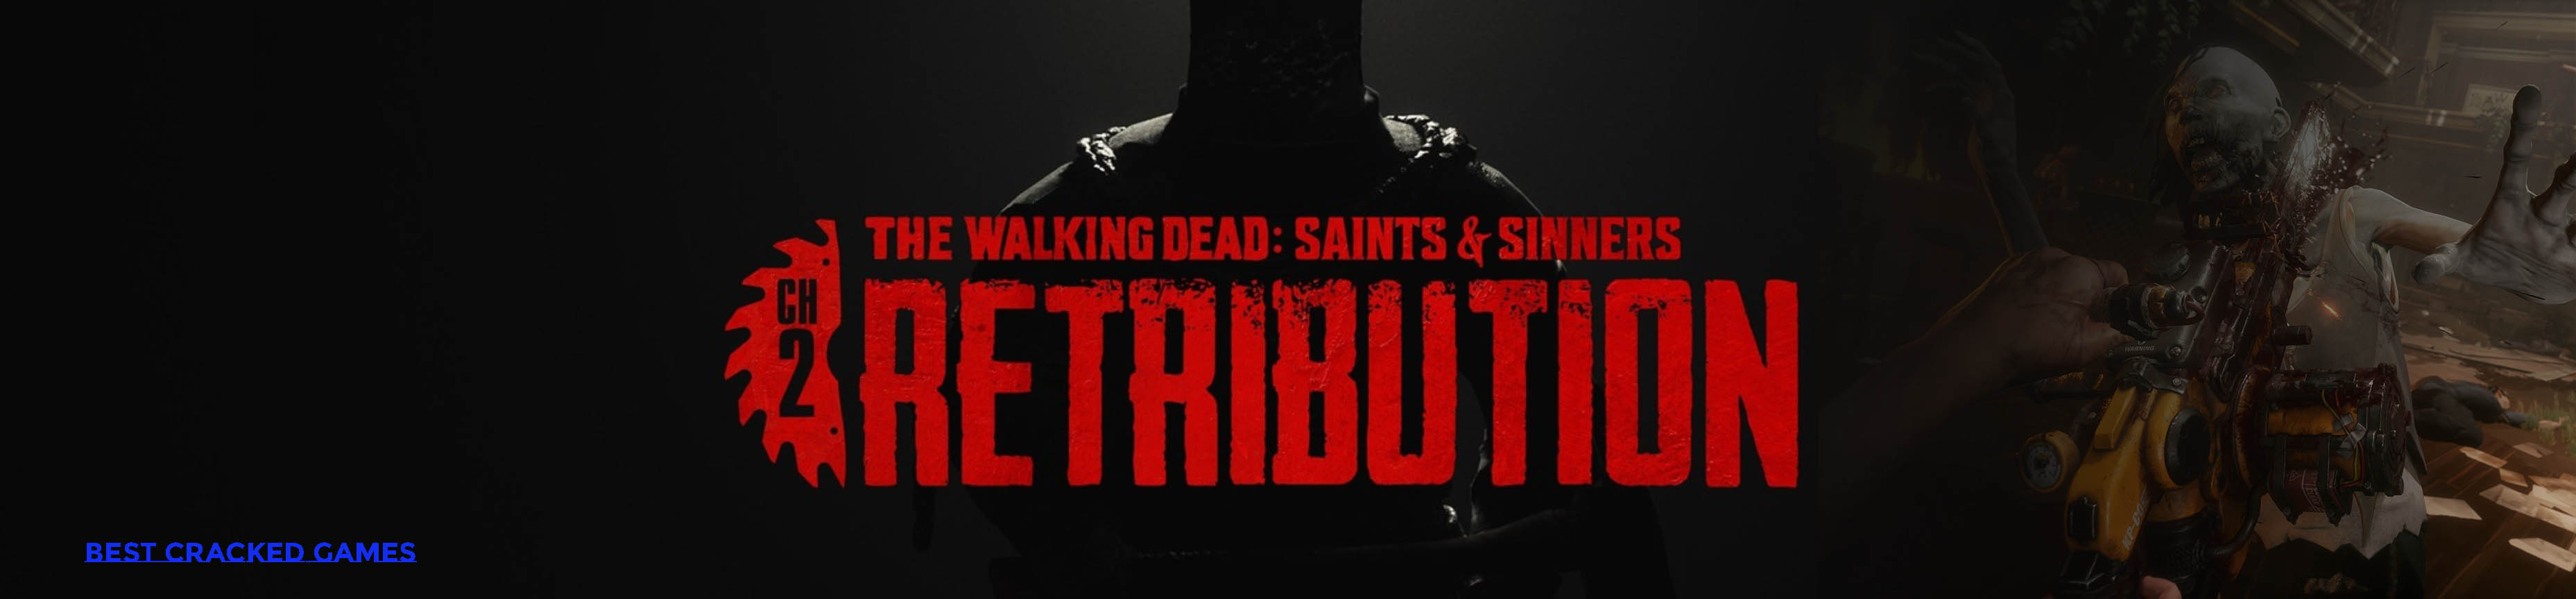 The Walking Dead Saints & Sinners - Chapter 2 Retribution, oculus (meta) quest 1  2, cracked game